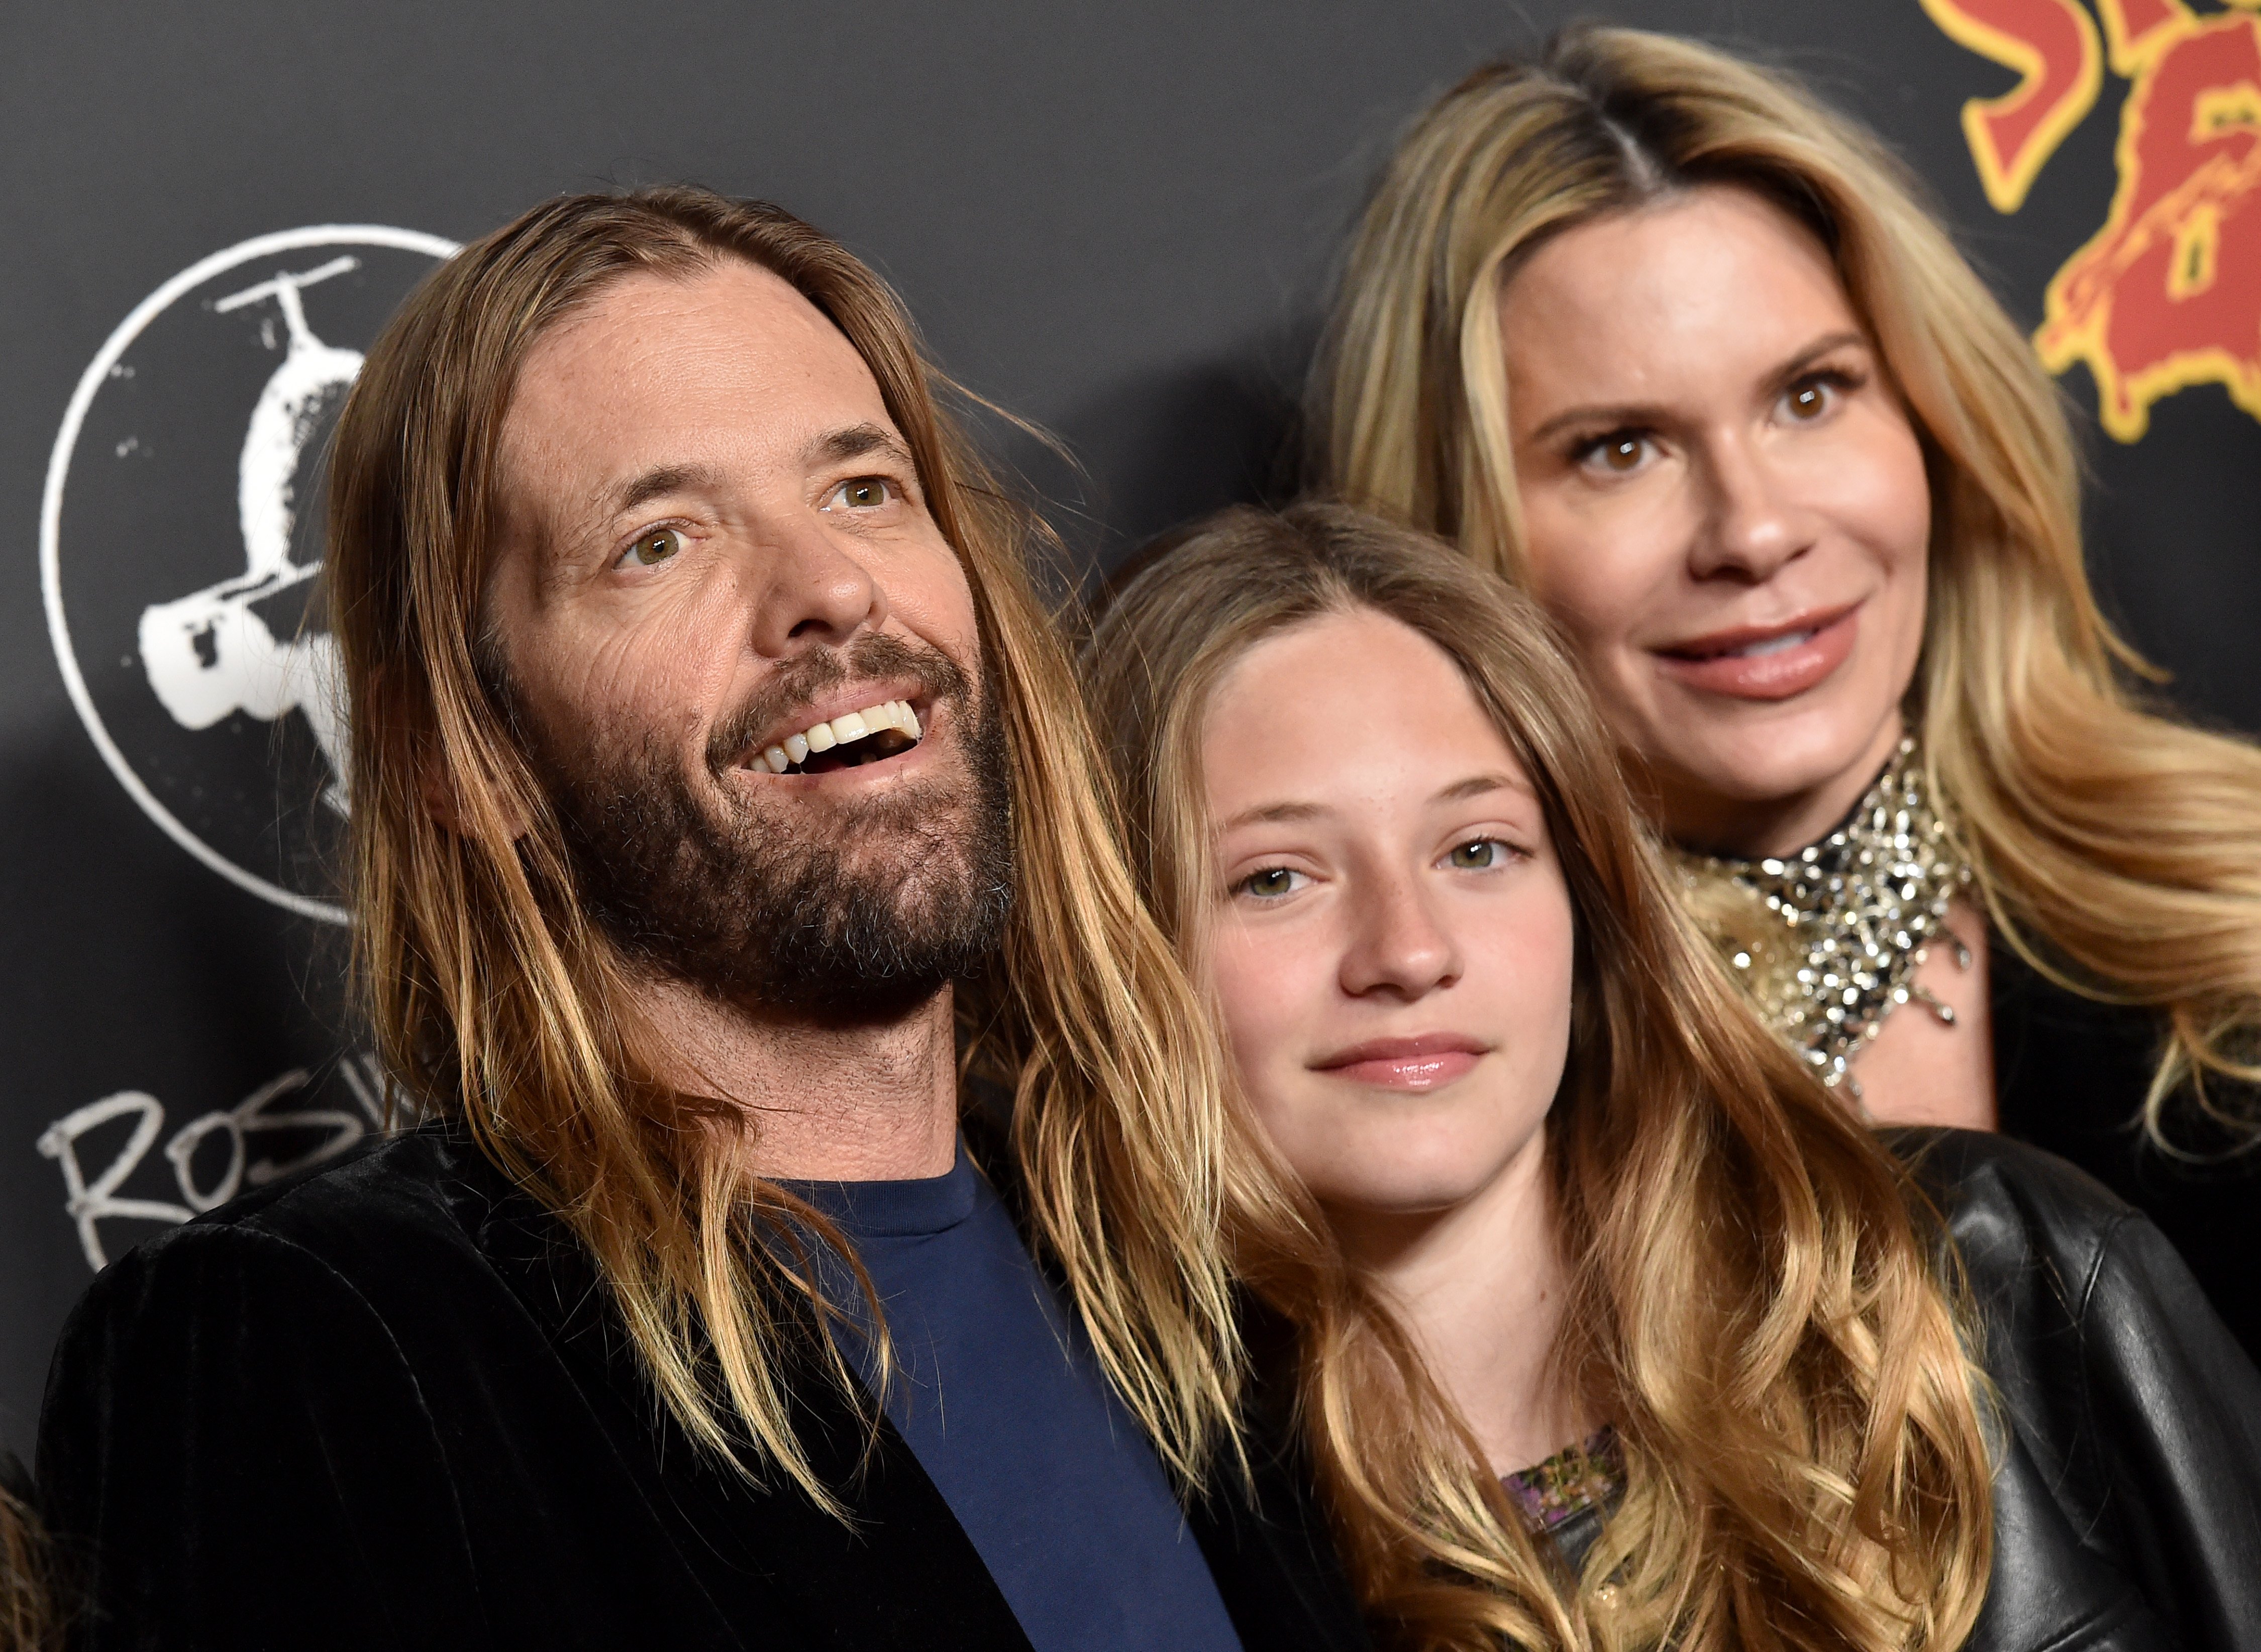 (L-R) Taylor Hawkins, Annabelle Hawkins and Alison Hawkins are pictured at the Los Angeles Premiere of "Studio 666" at TCL Chinese Theatre on February 16, 2022, in Hollywood, California | Source: Getty Images